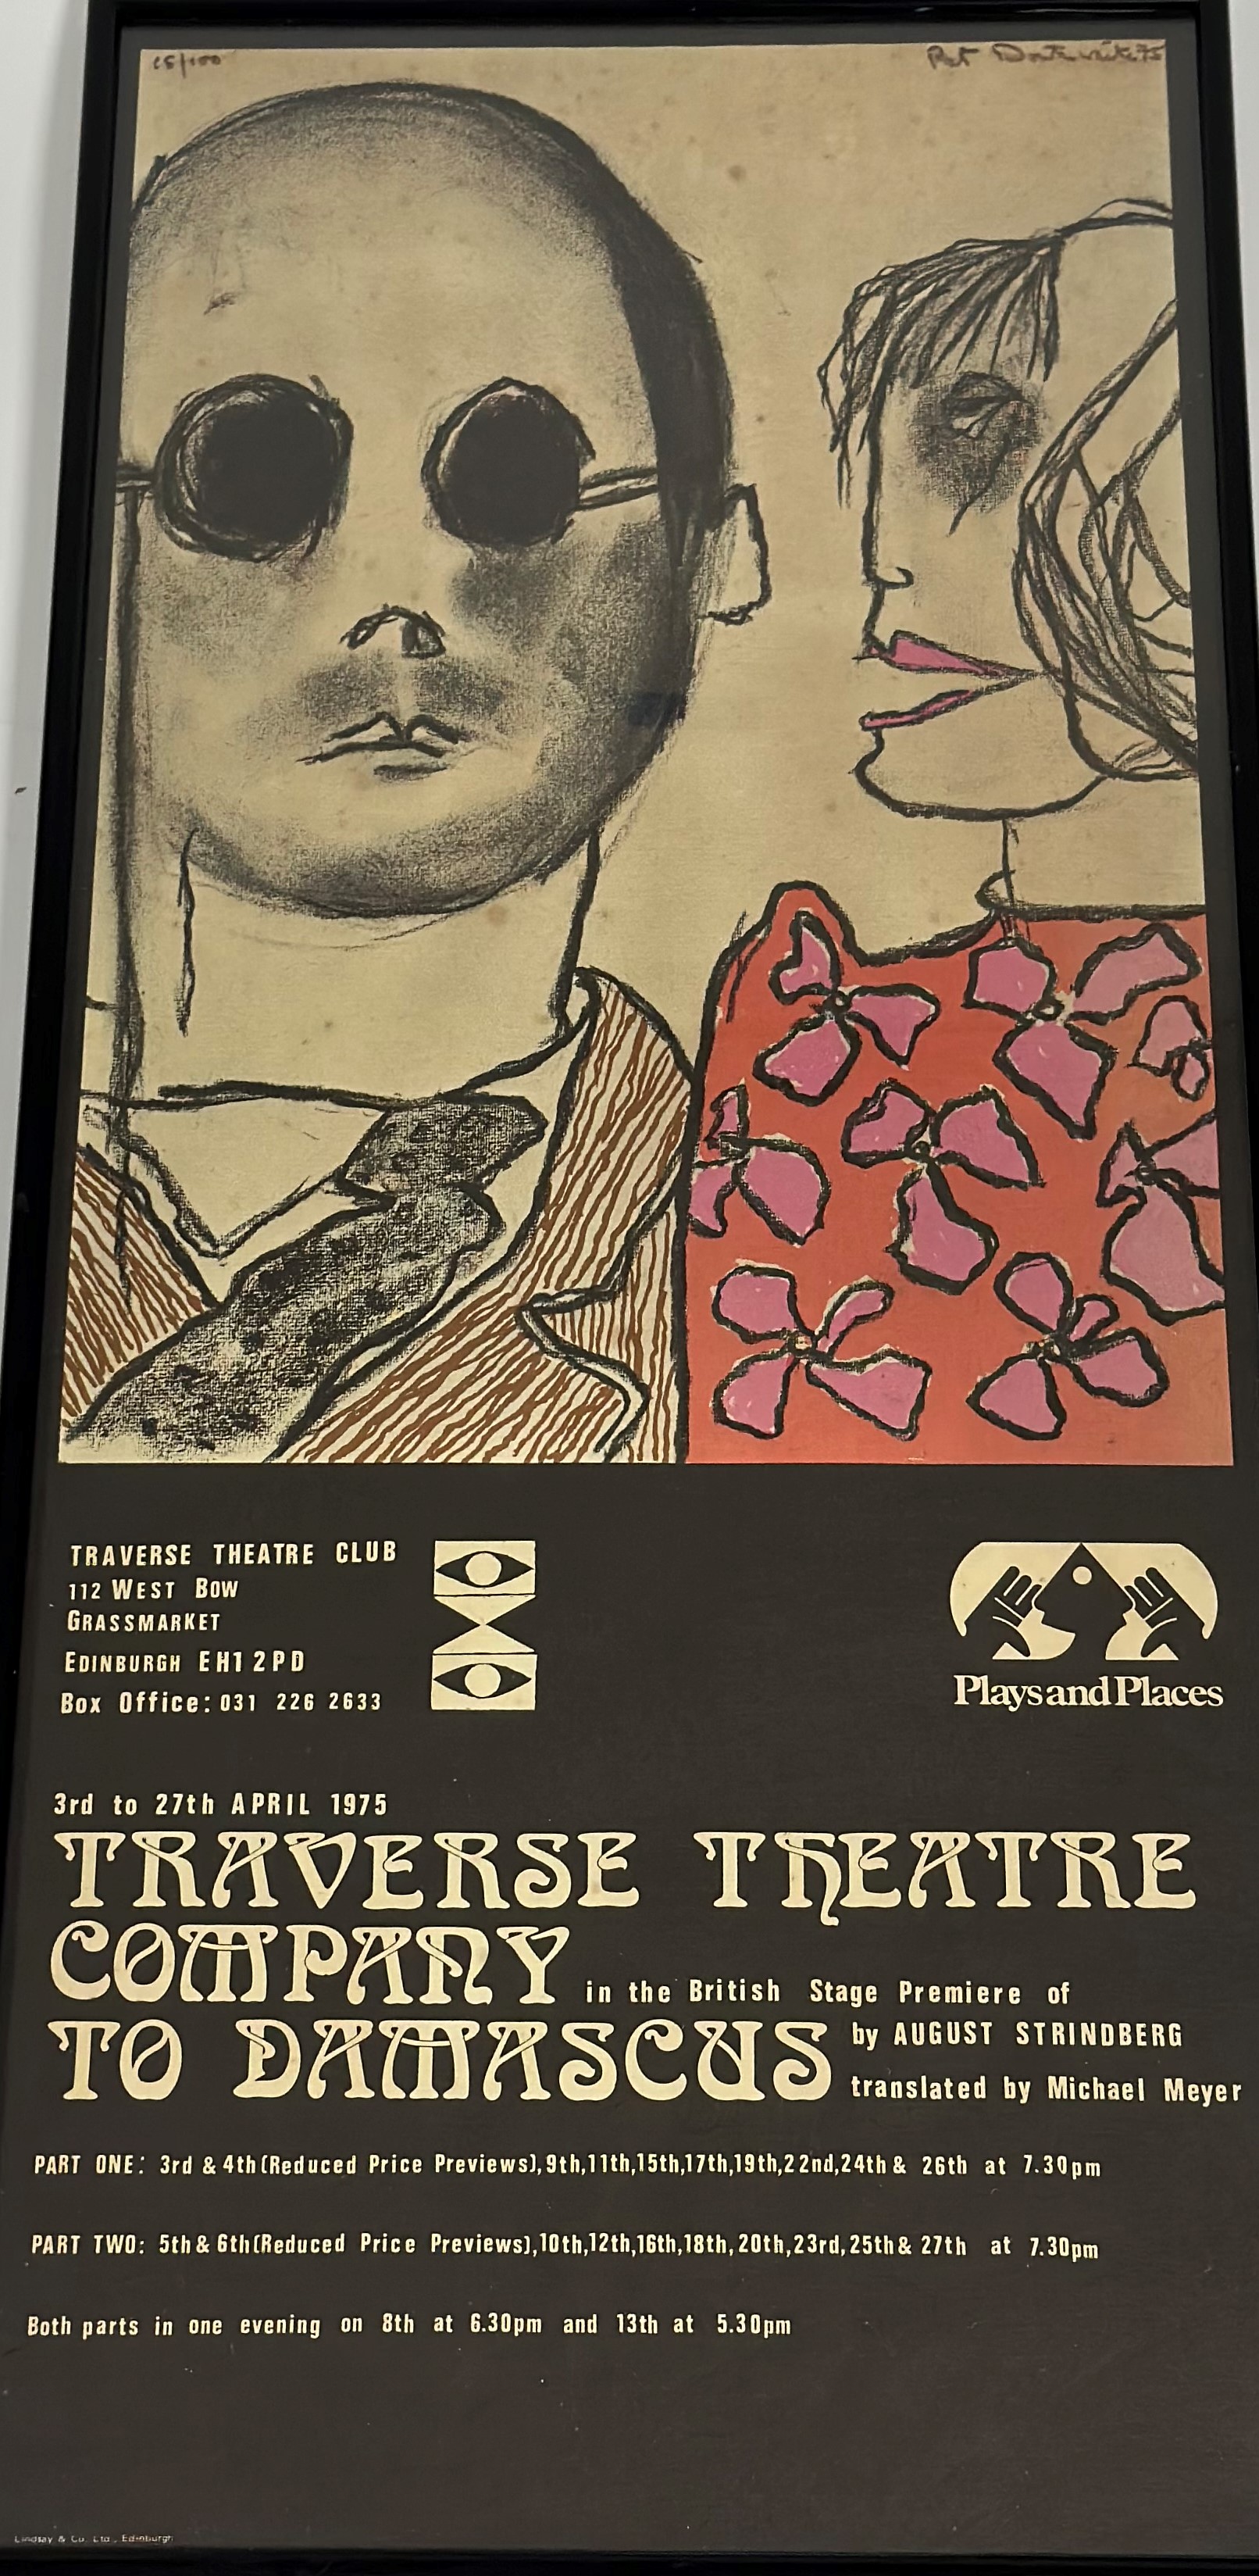 •Pat Douthwaite (Scottish, 1939-2002), a signed and numbered lithographic poster, The Traverse